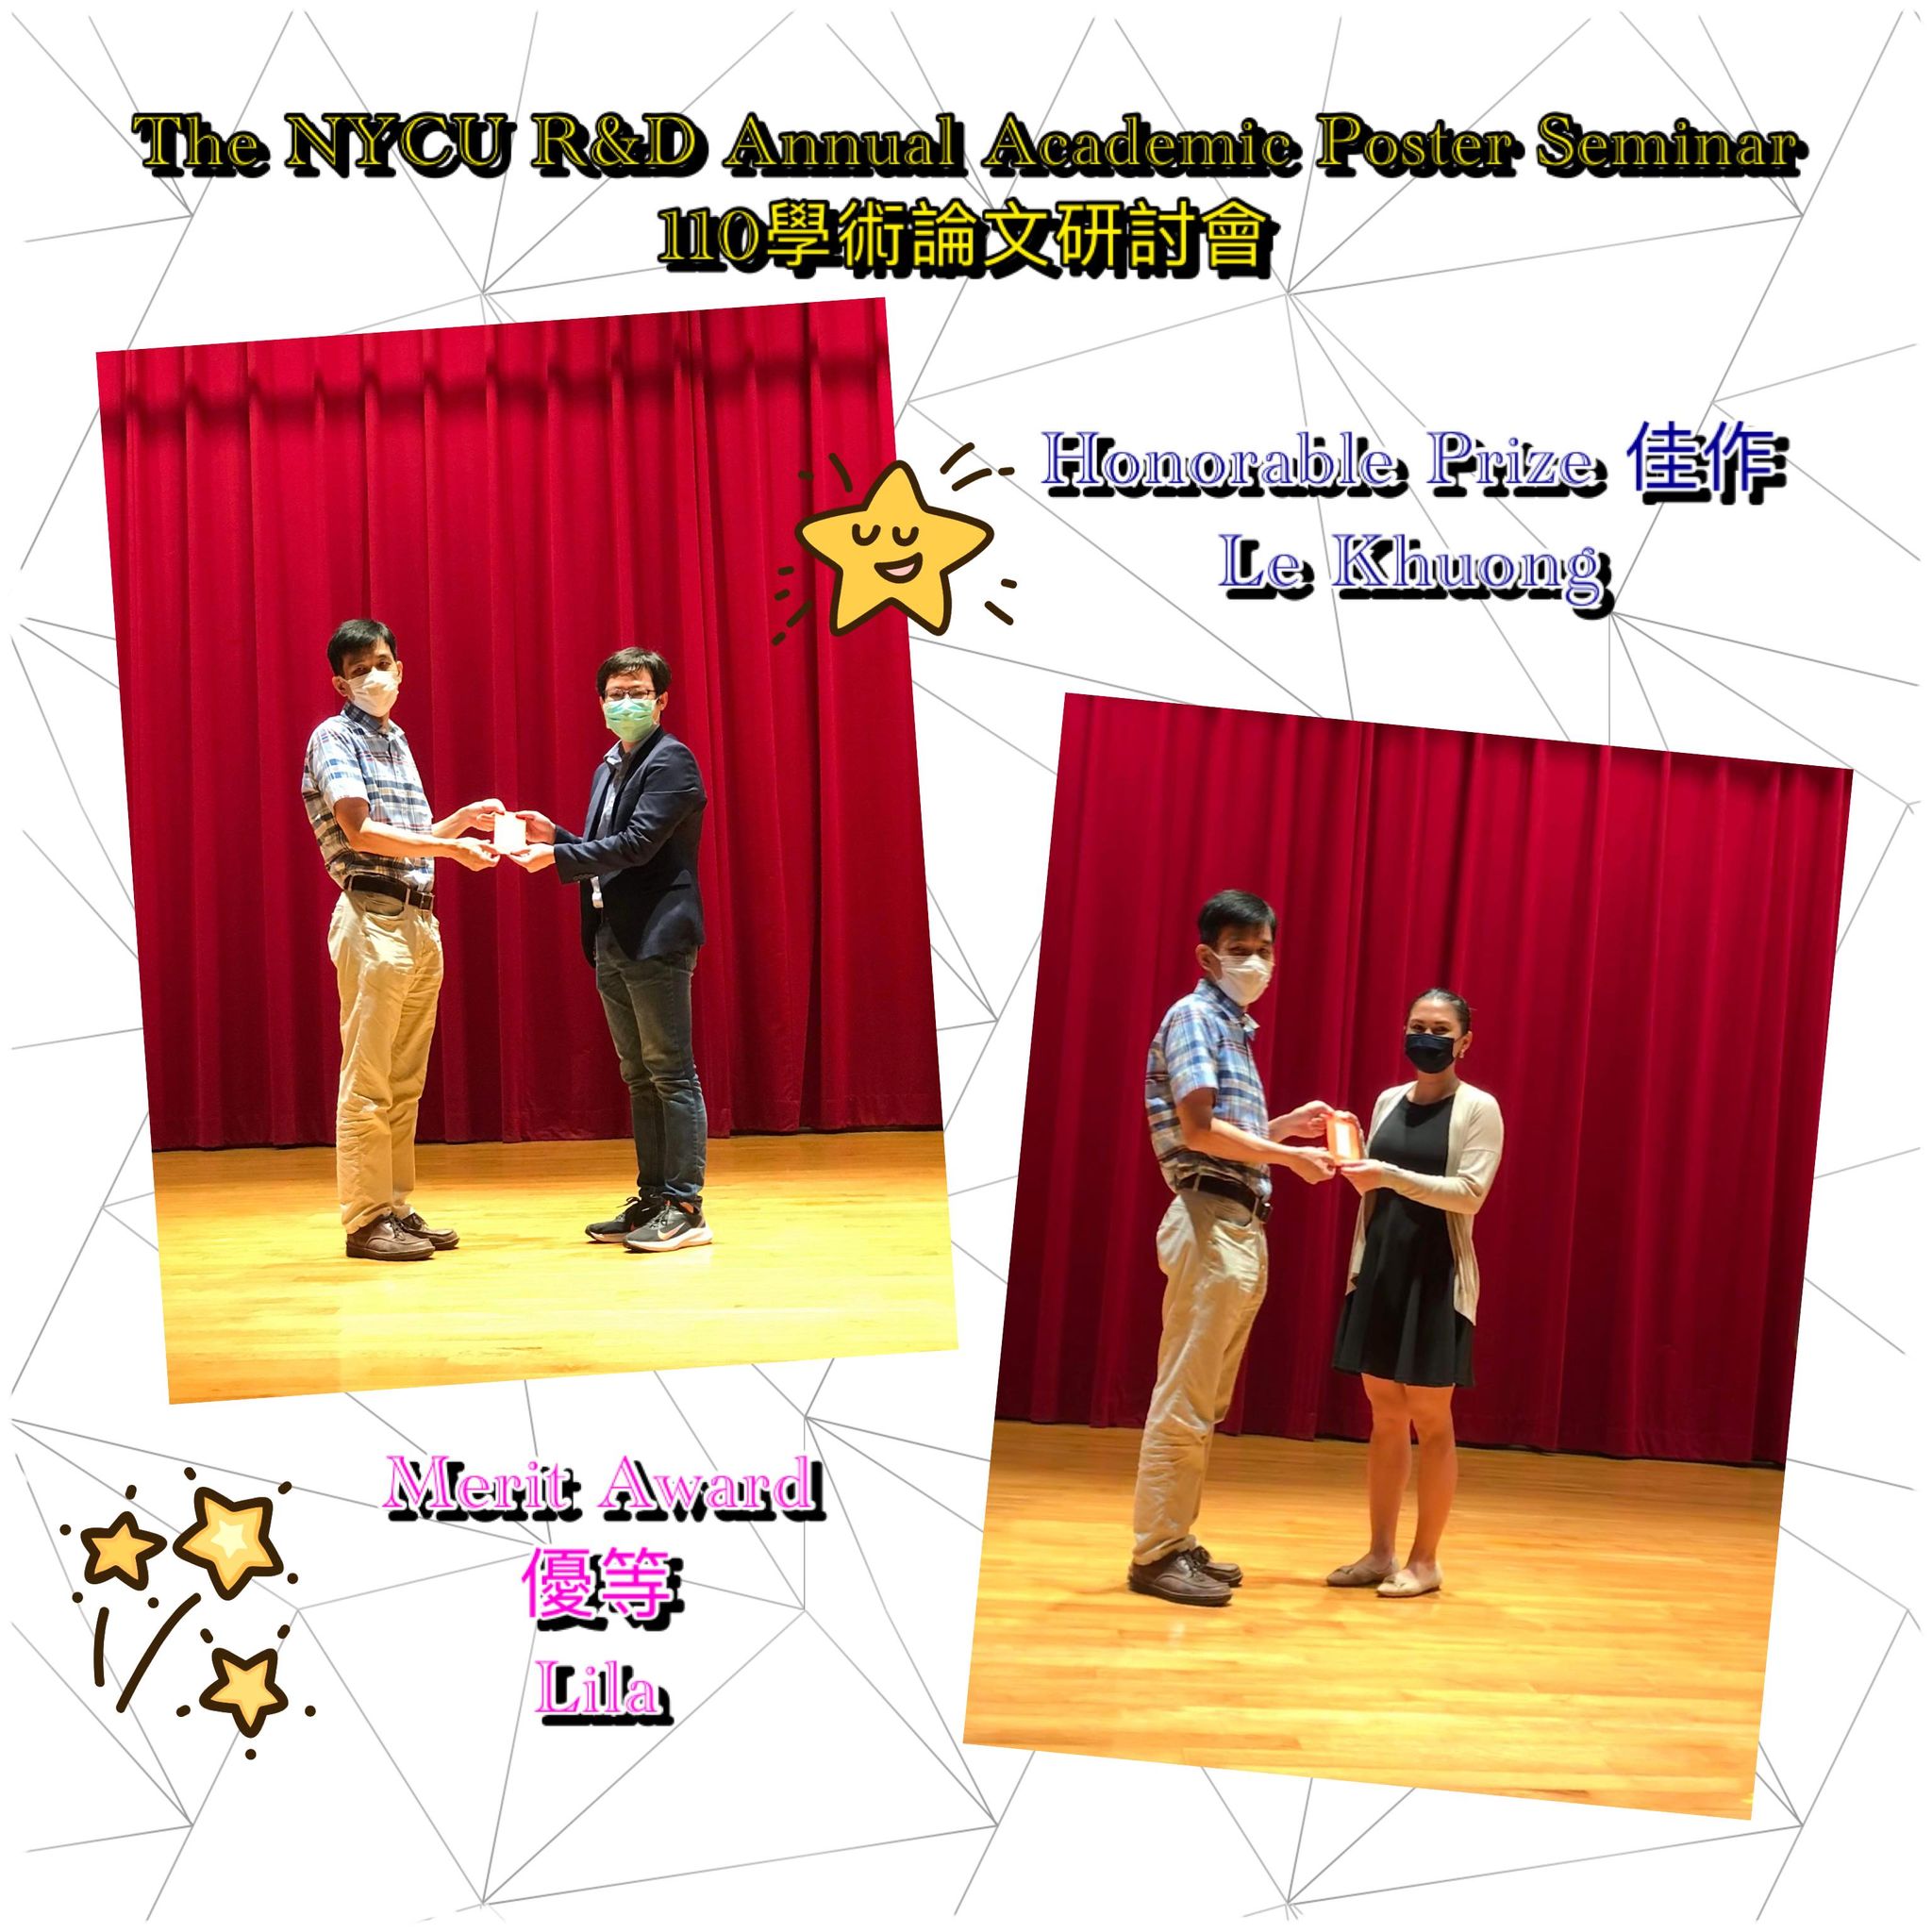 The NYCU R and D Annual Academic Poster Seminar 110學年度學術論文研討會－Congratulations to Lila and Khuong